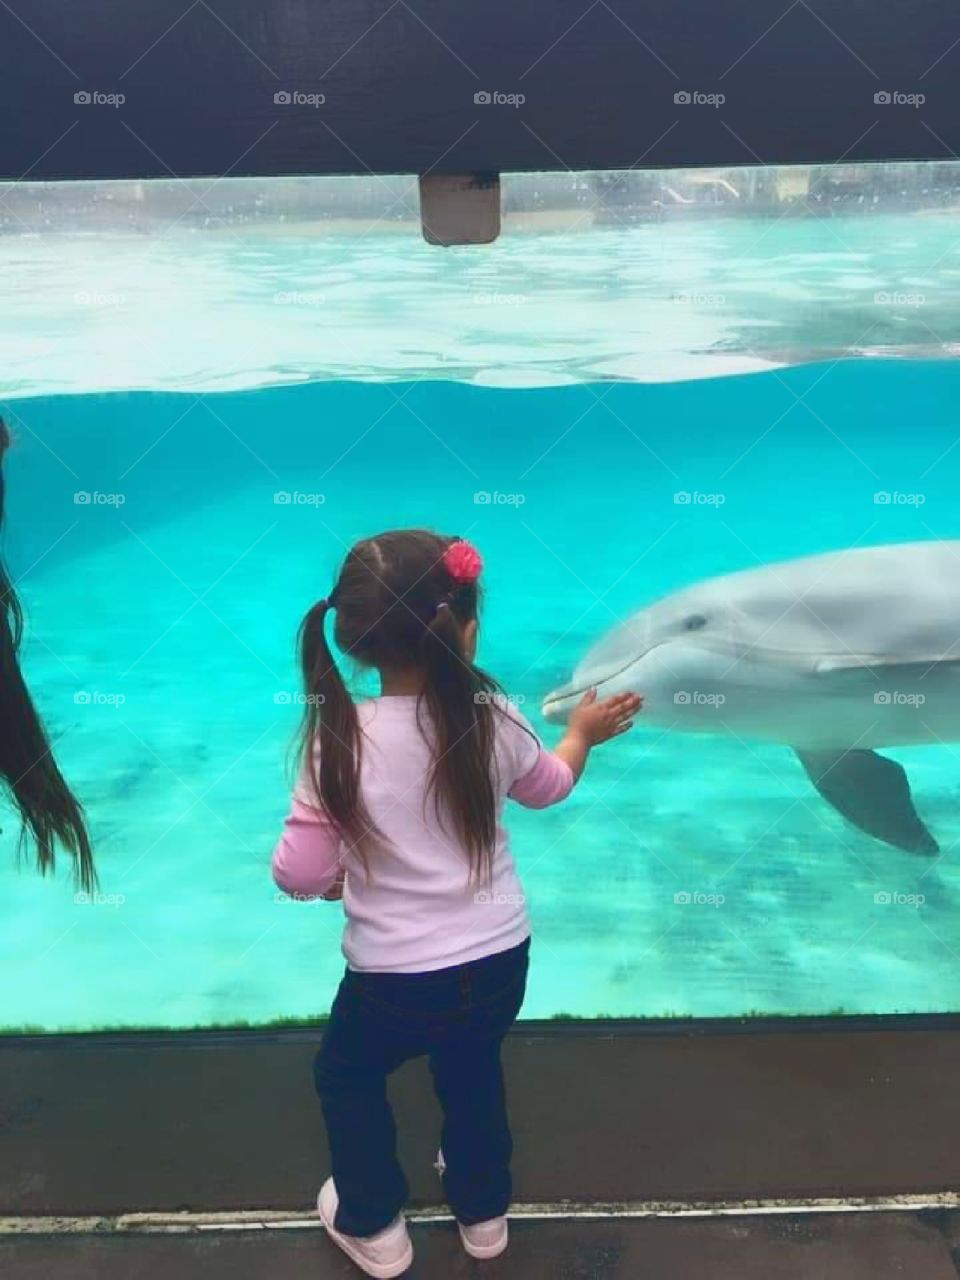 dolphin and elyse